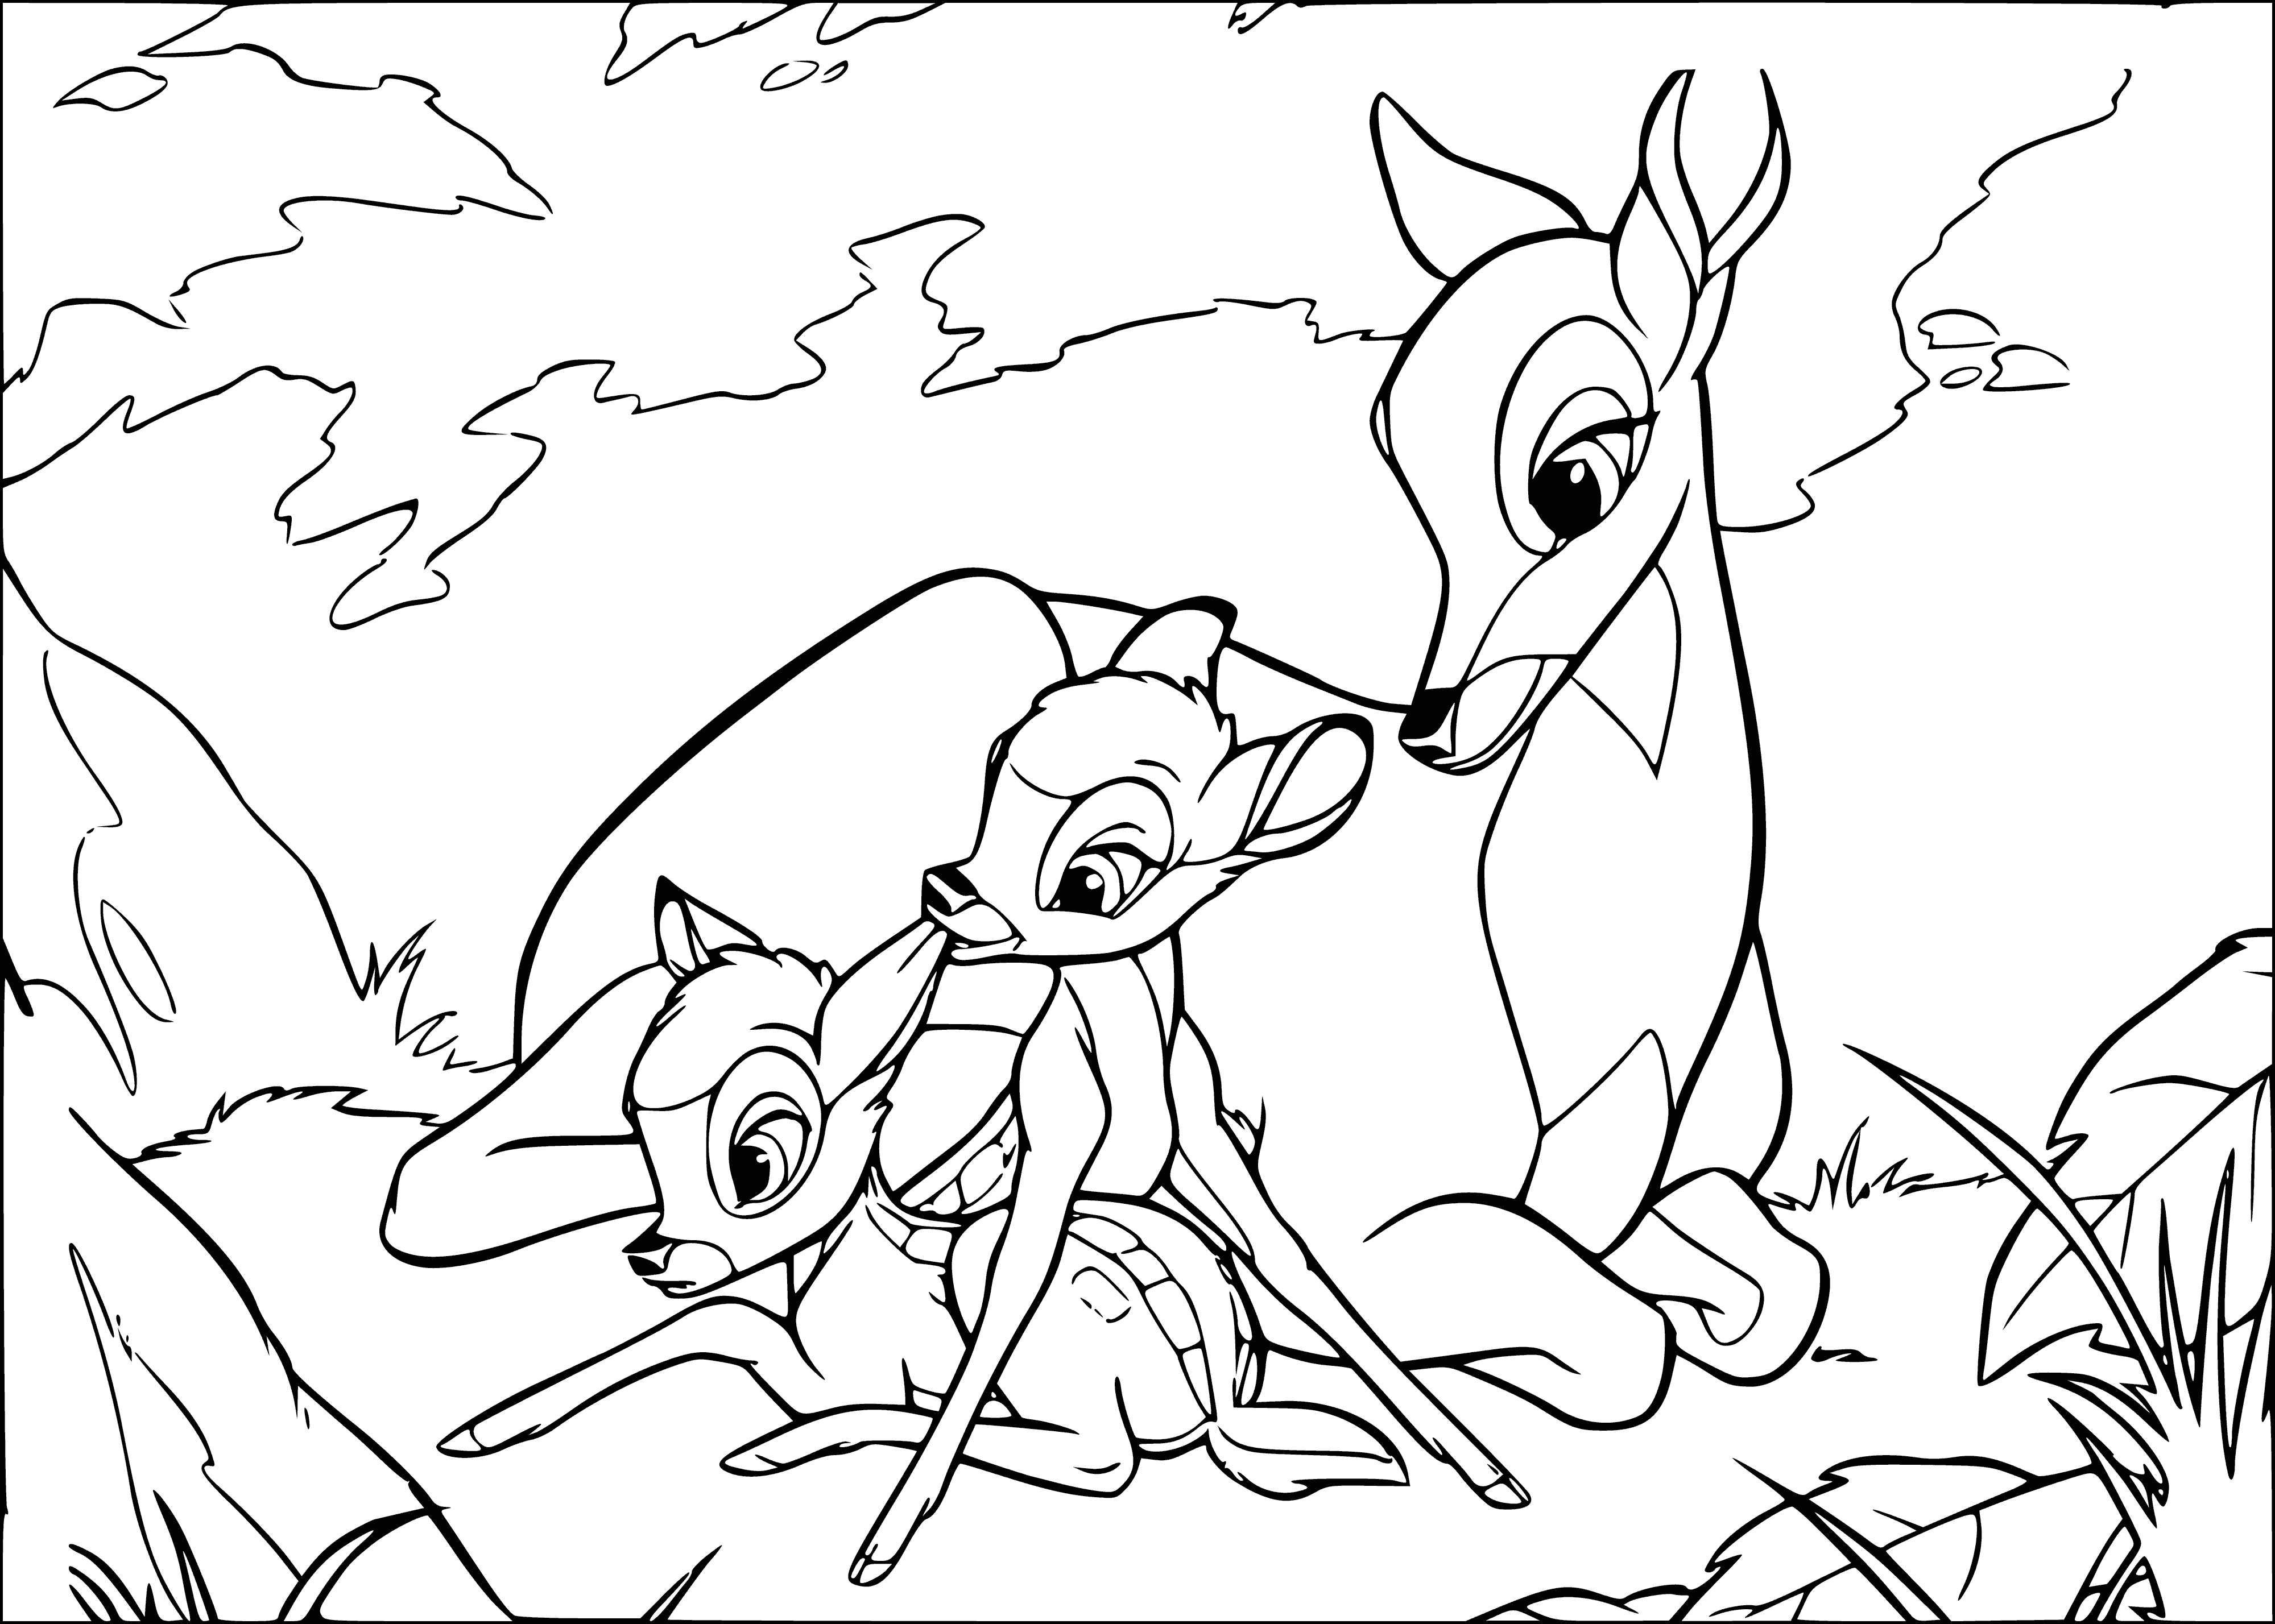 Mom Bambi coloring page